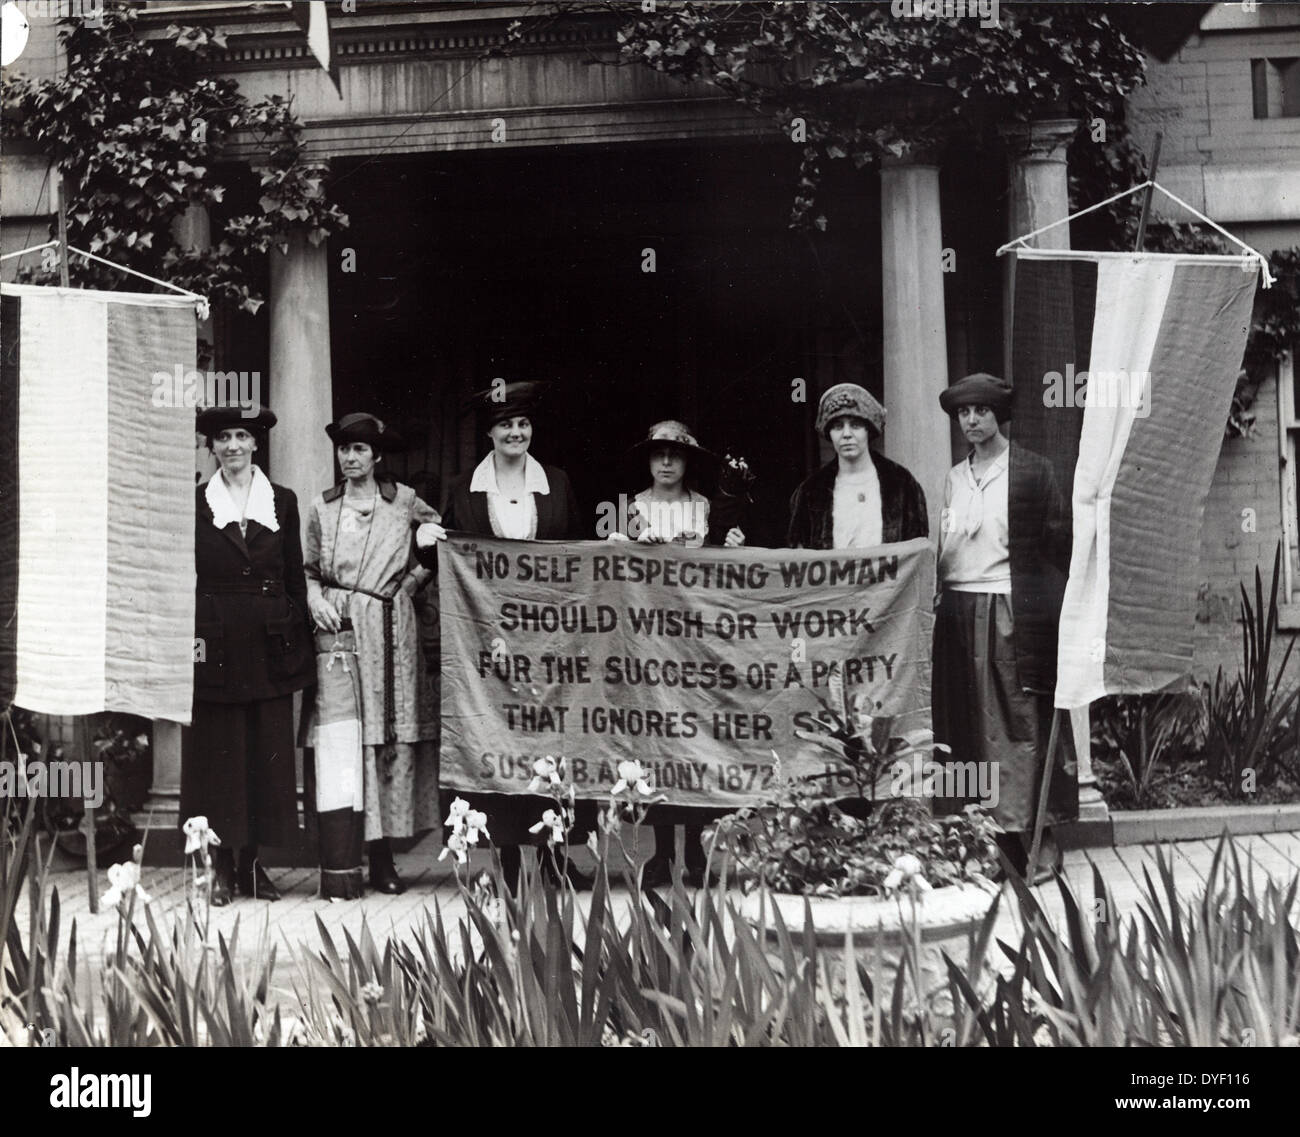 Photograph of six suffragists at the 1920 Republican National Convention in Chicago, gathered in front of a building with suffrage banners. Mrs. James Rector, Mary Dubrow, and Alice Paul (left to right) hold centre banner that reads: 'No self respecting woman should wish or work for the success of a party that ignores her self. Susan B. Anthony, 1872.' Stock Photo